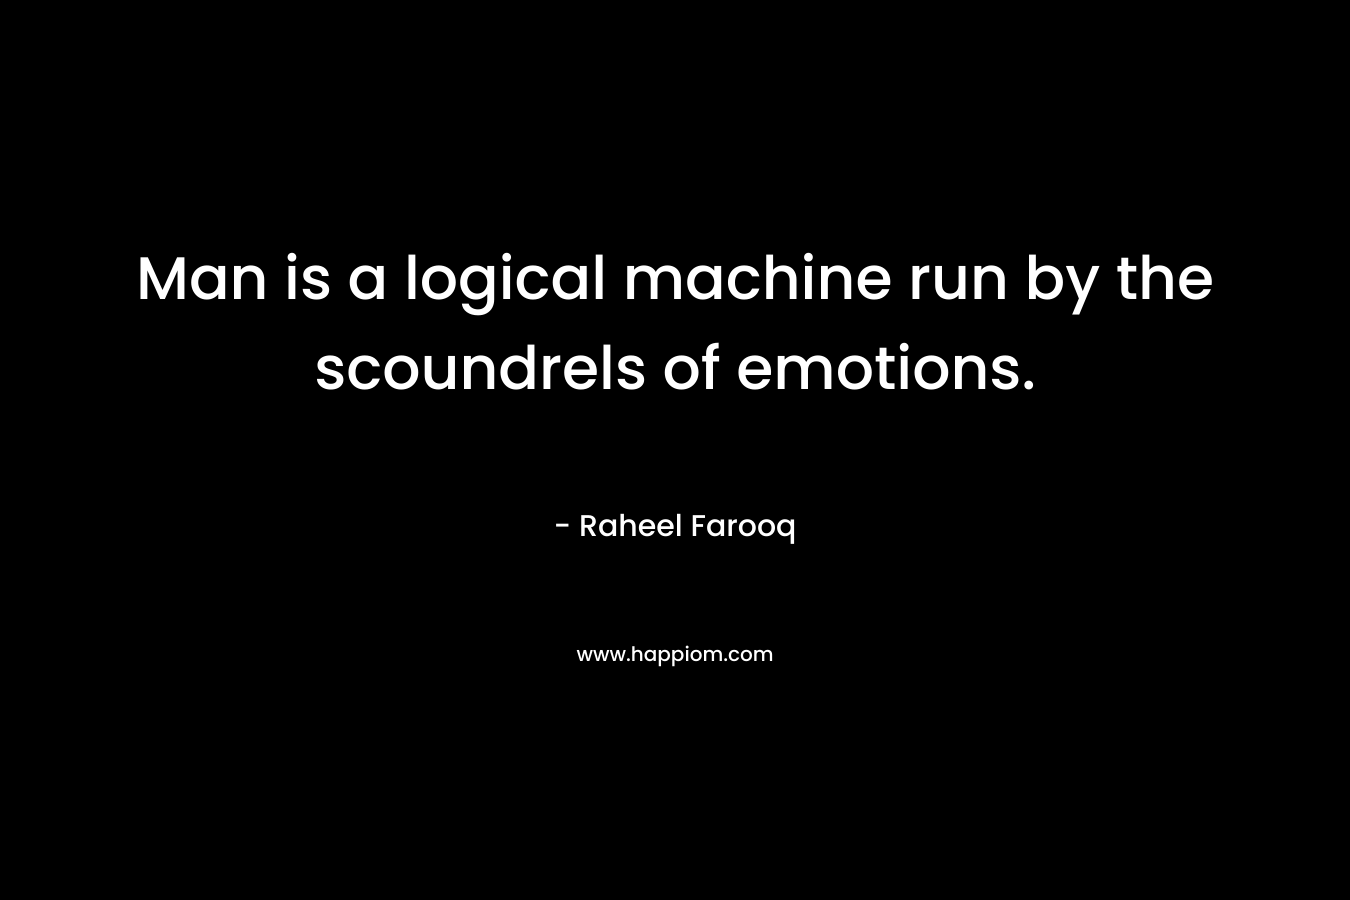 Man is a logical machine run by the scoundrels of emotions. – Raheel Farooq